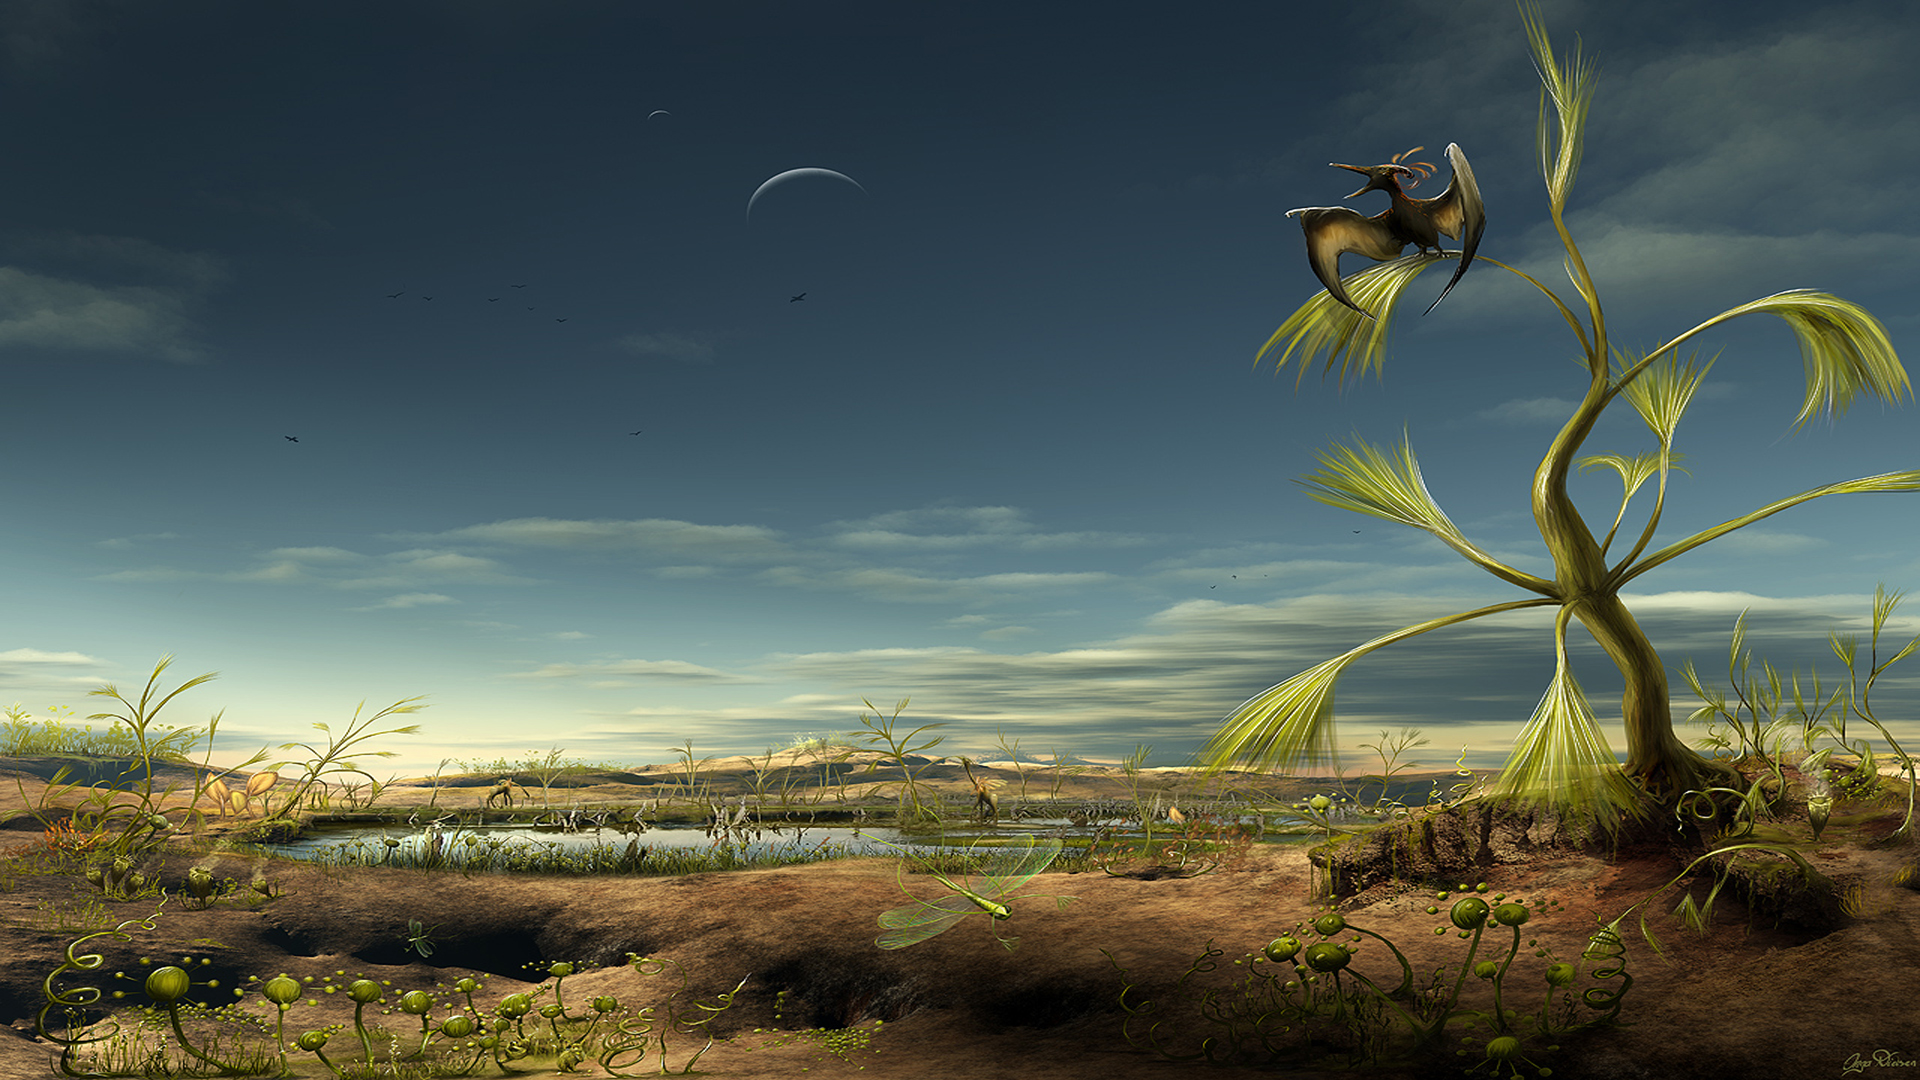 Colorful prehistoric scene with a pterodactyl flying over a pond surrounded by plants and insects.